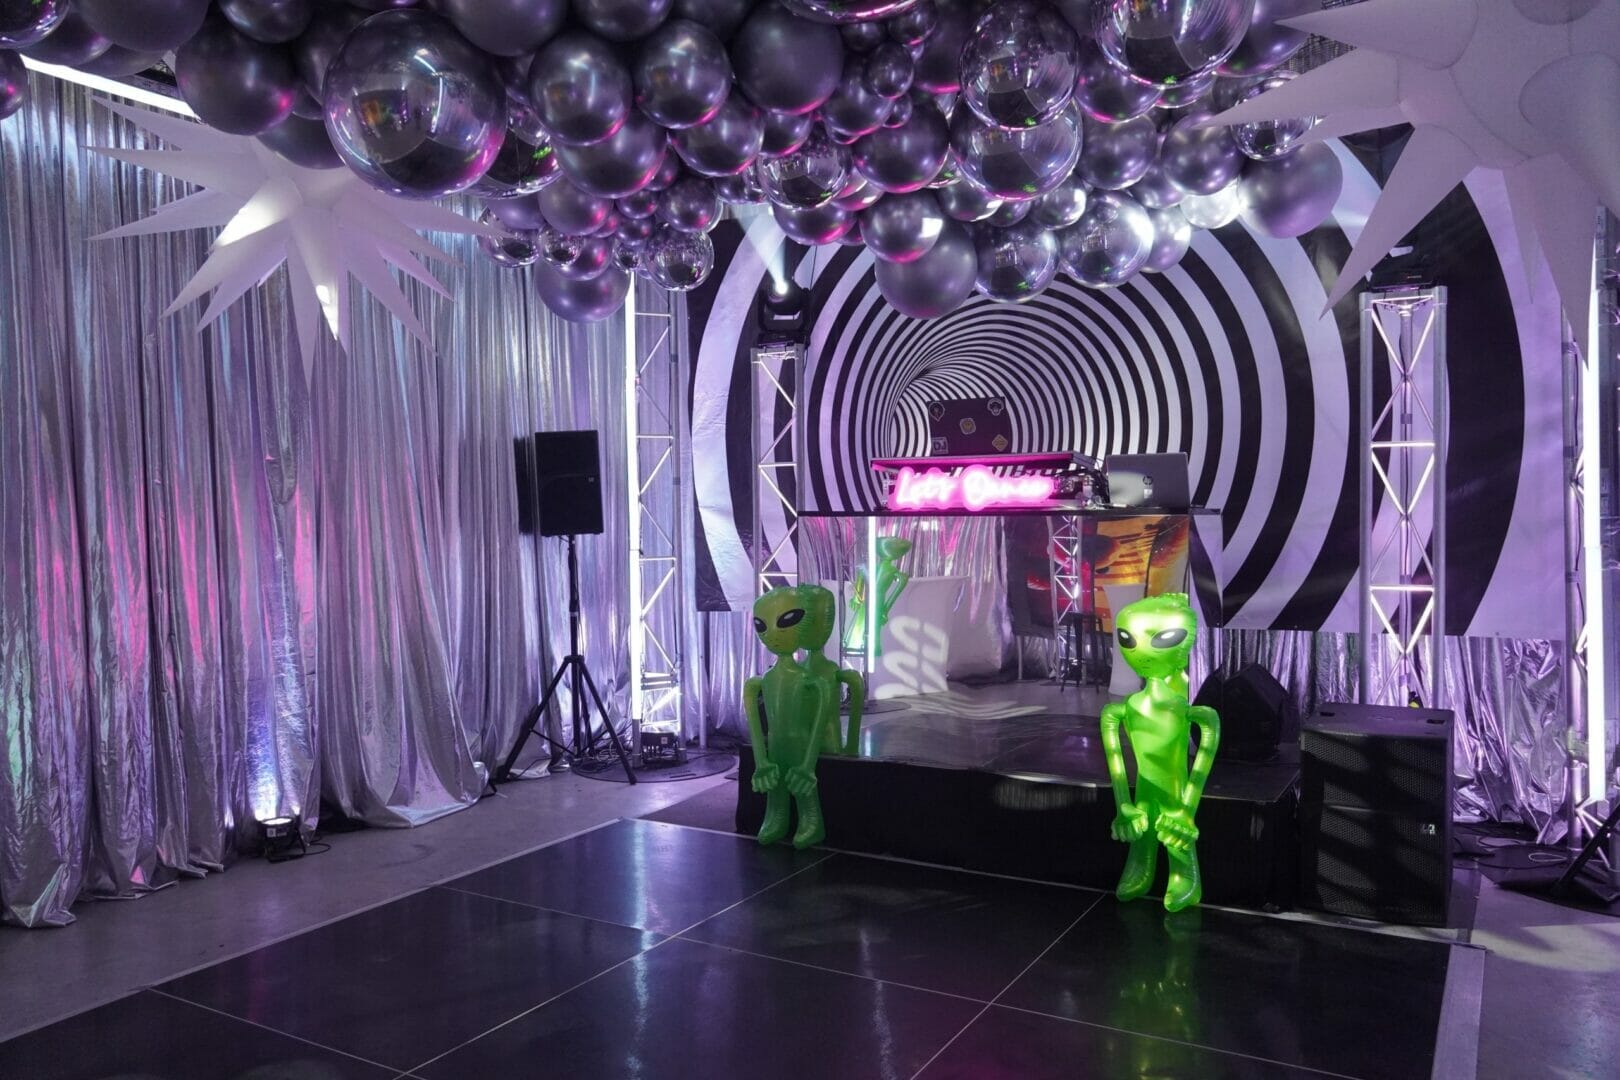 Dance floor area of space themed party. Party lights, inflatable props, balloons, themed backdrops.